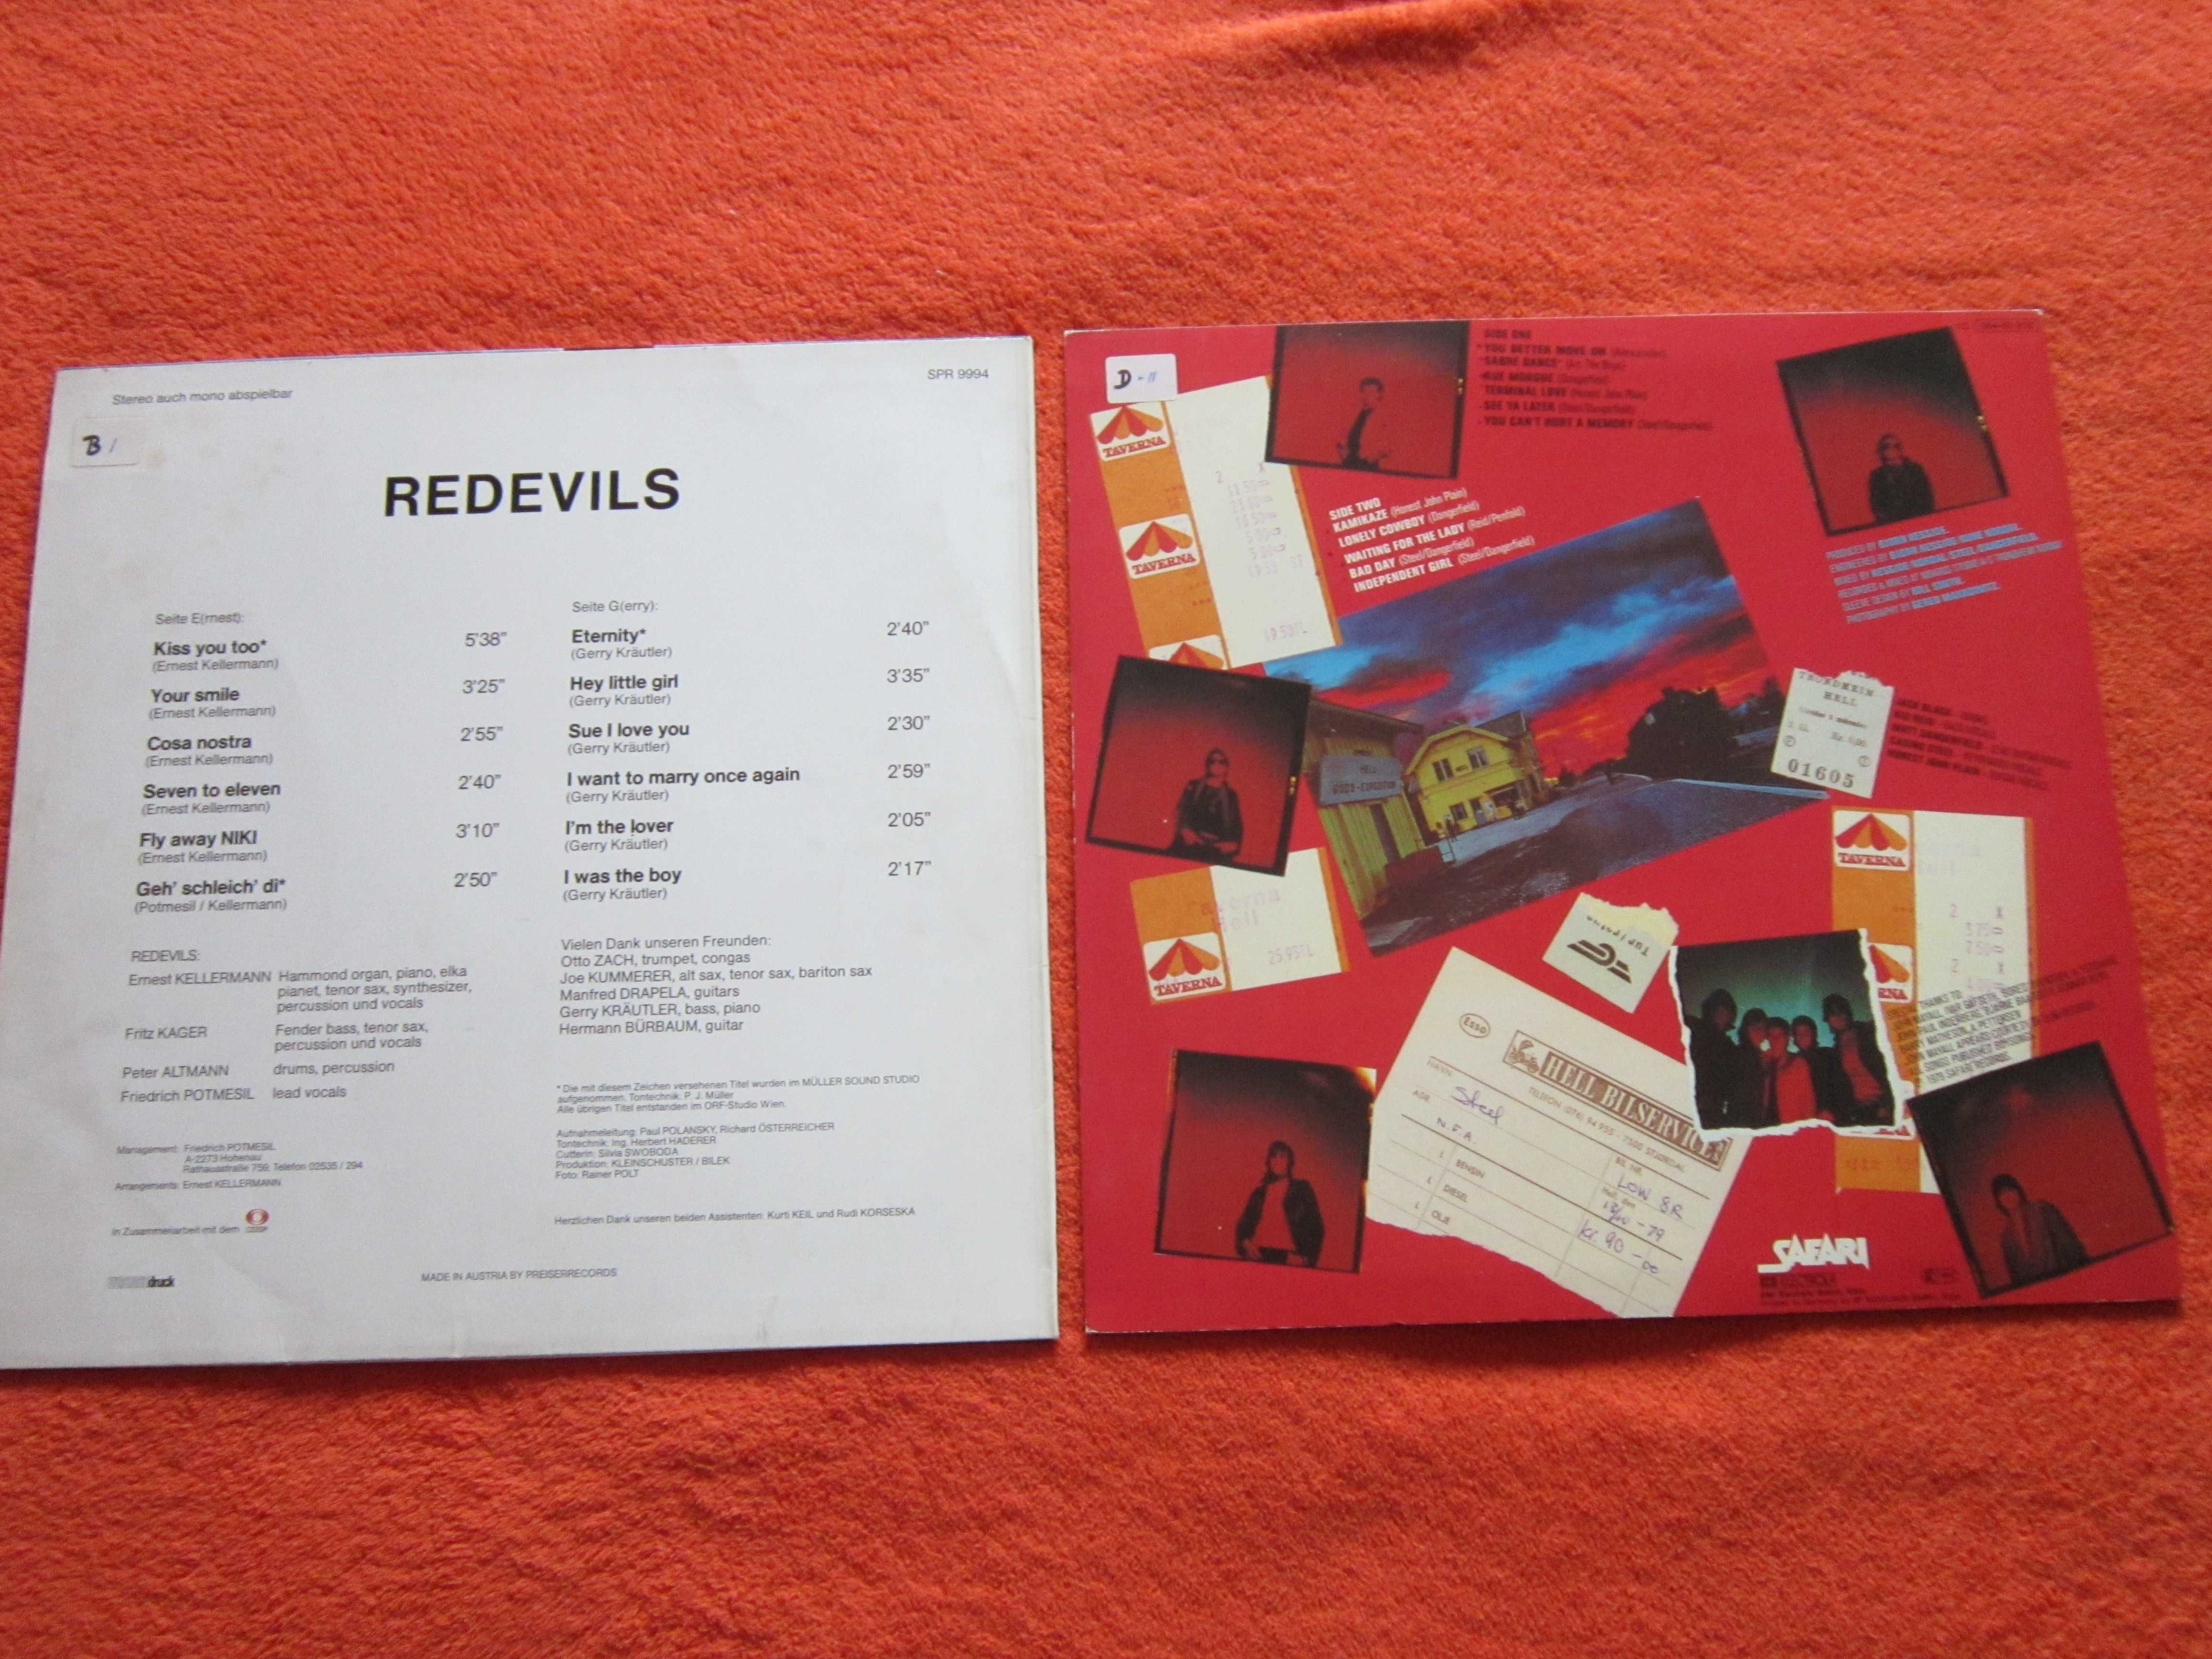 vinil rar Red Devils-Redevils/The Boys-To Hell With Boys-pun